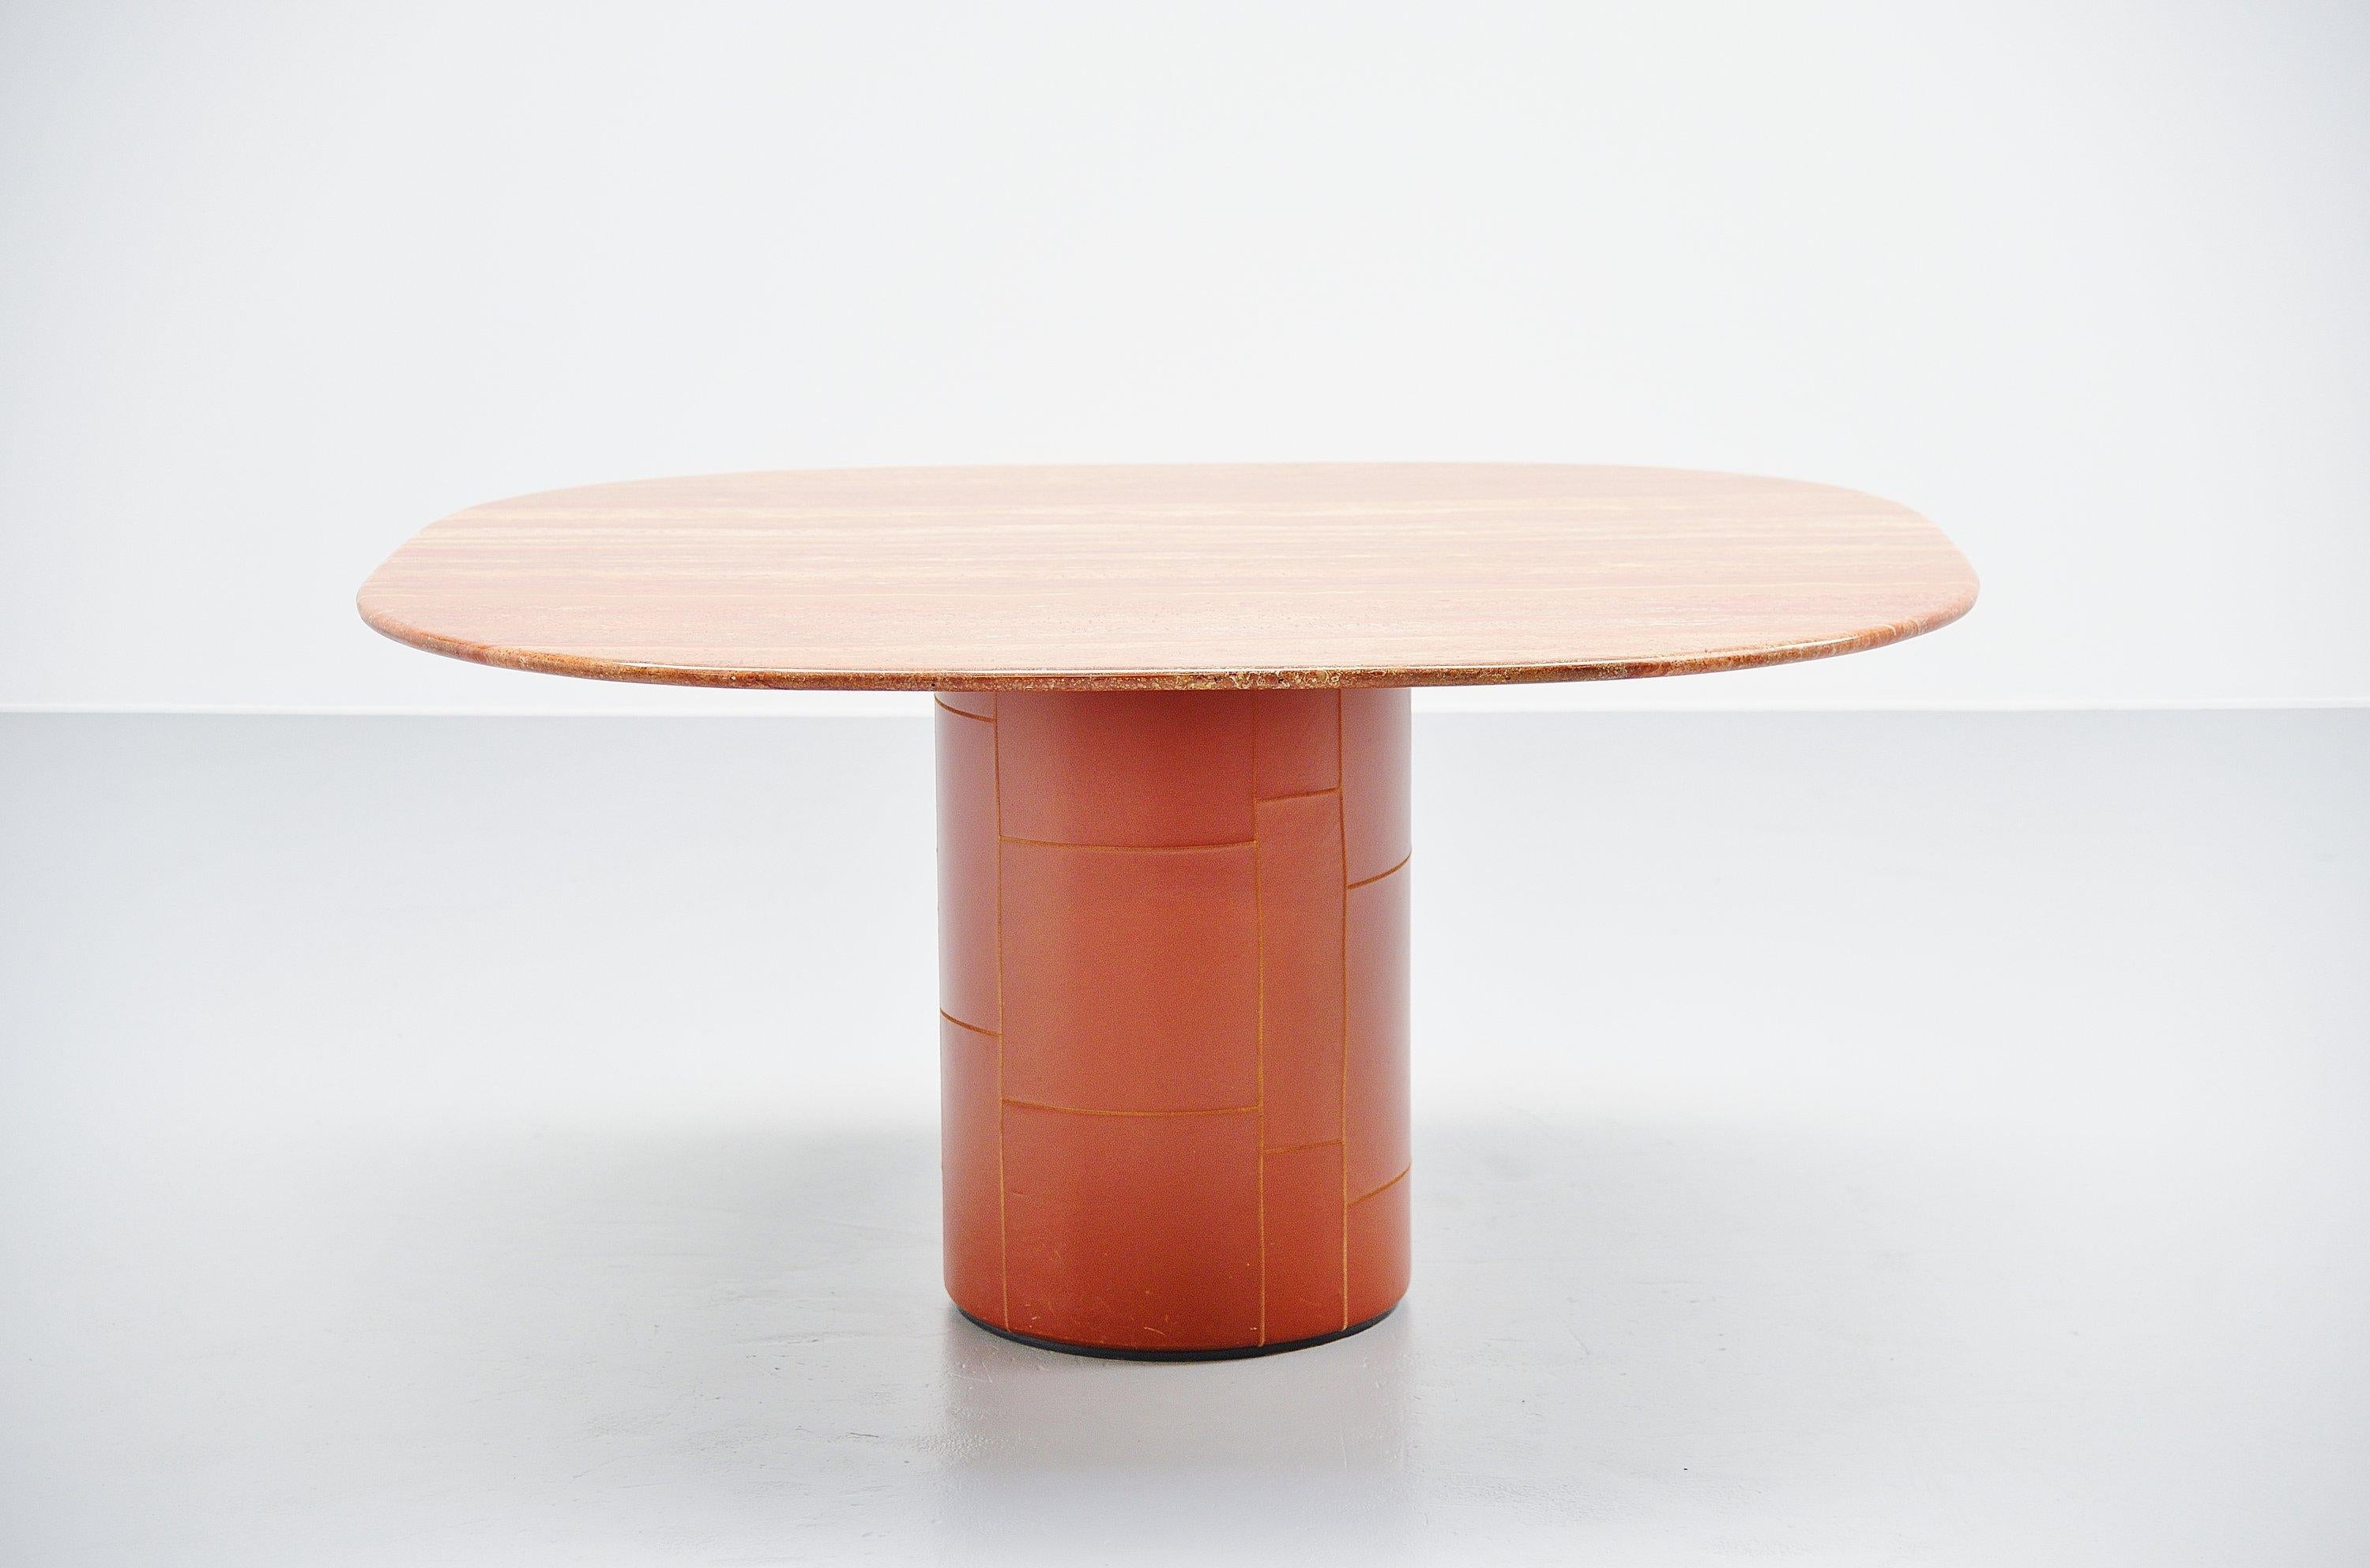 Highly decorative 'Tobio' dining or center table designed by designer duo Afra e Tobia Scarpa and manufactured by B&B Italia, Italy, 1974. The table has a wooden base with cognac leather patchwork cover and a fantastic orange red marble top which